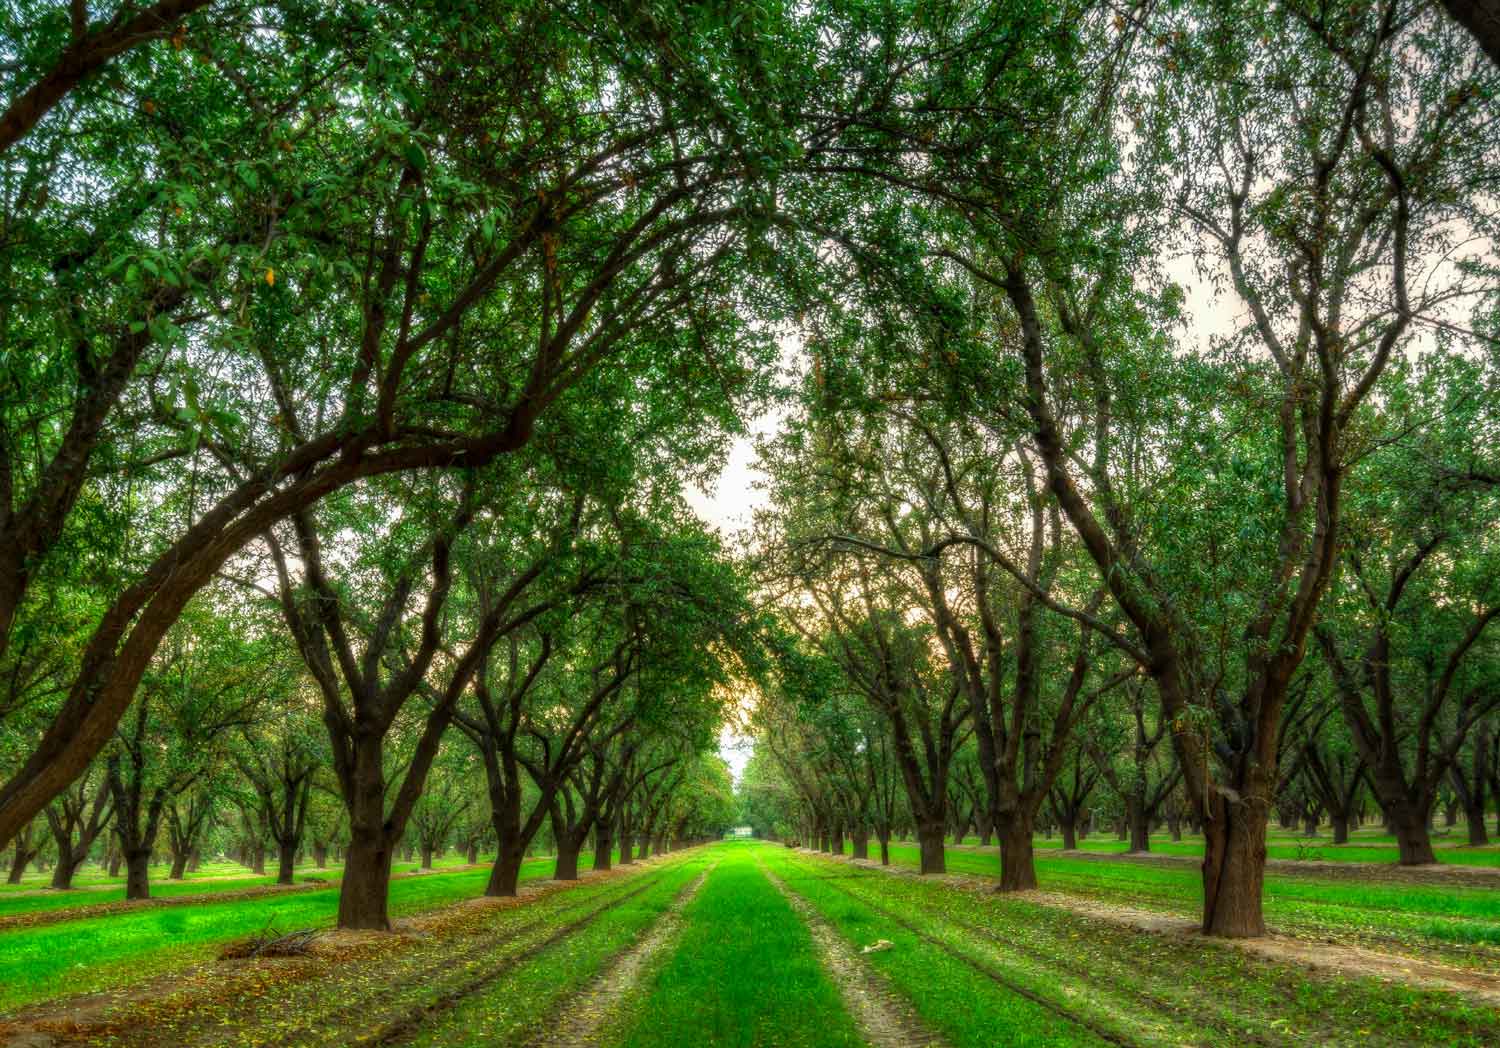 Photo of an orchard in Kern County, California.